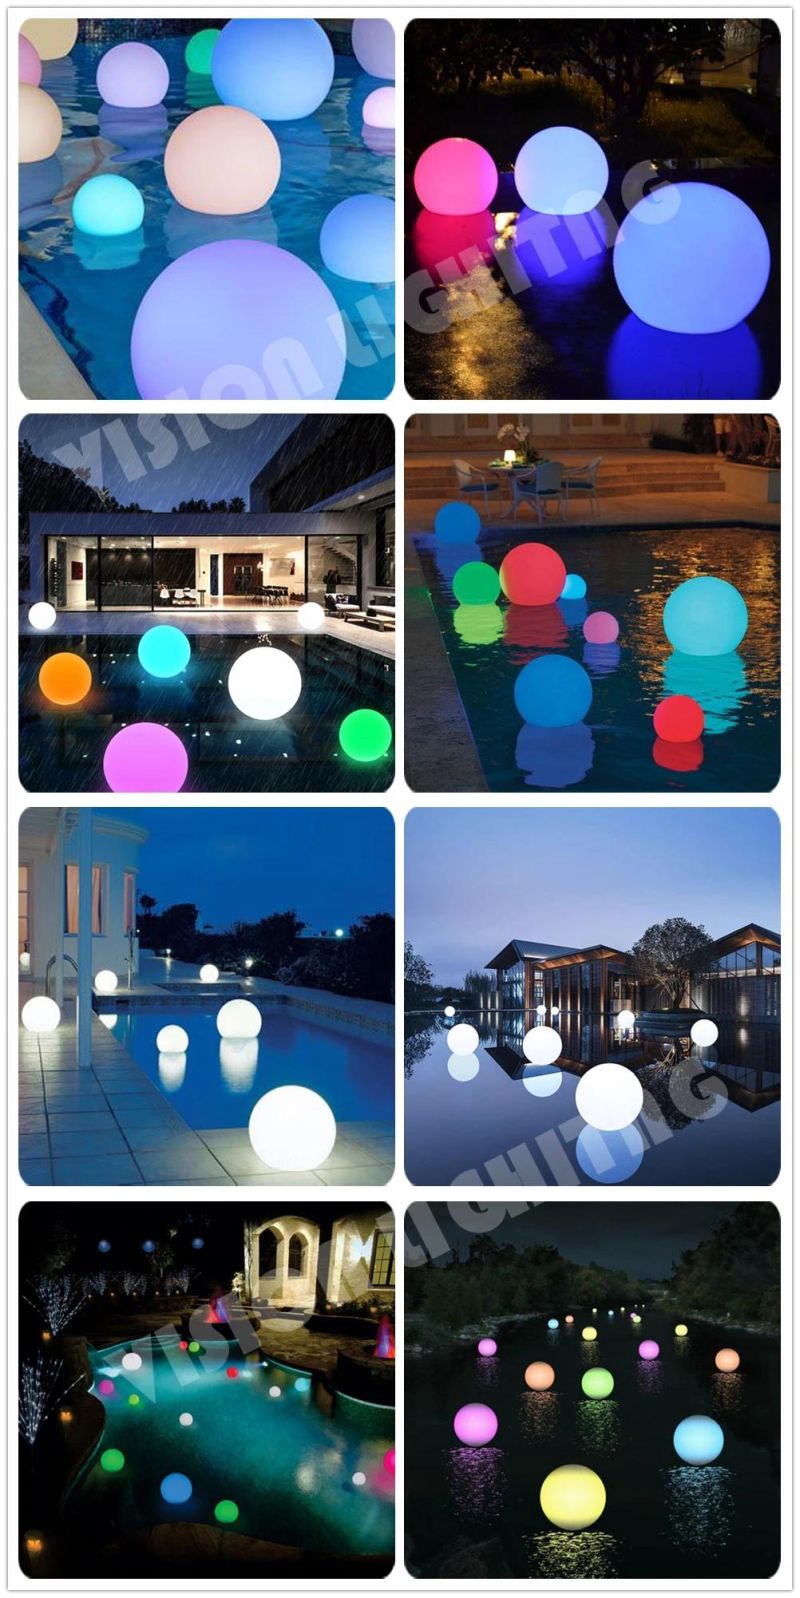 Portable Changeable Night Ball Light for Patio and Garden Decoration